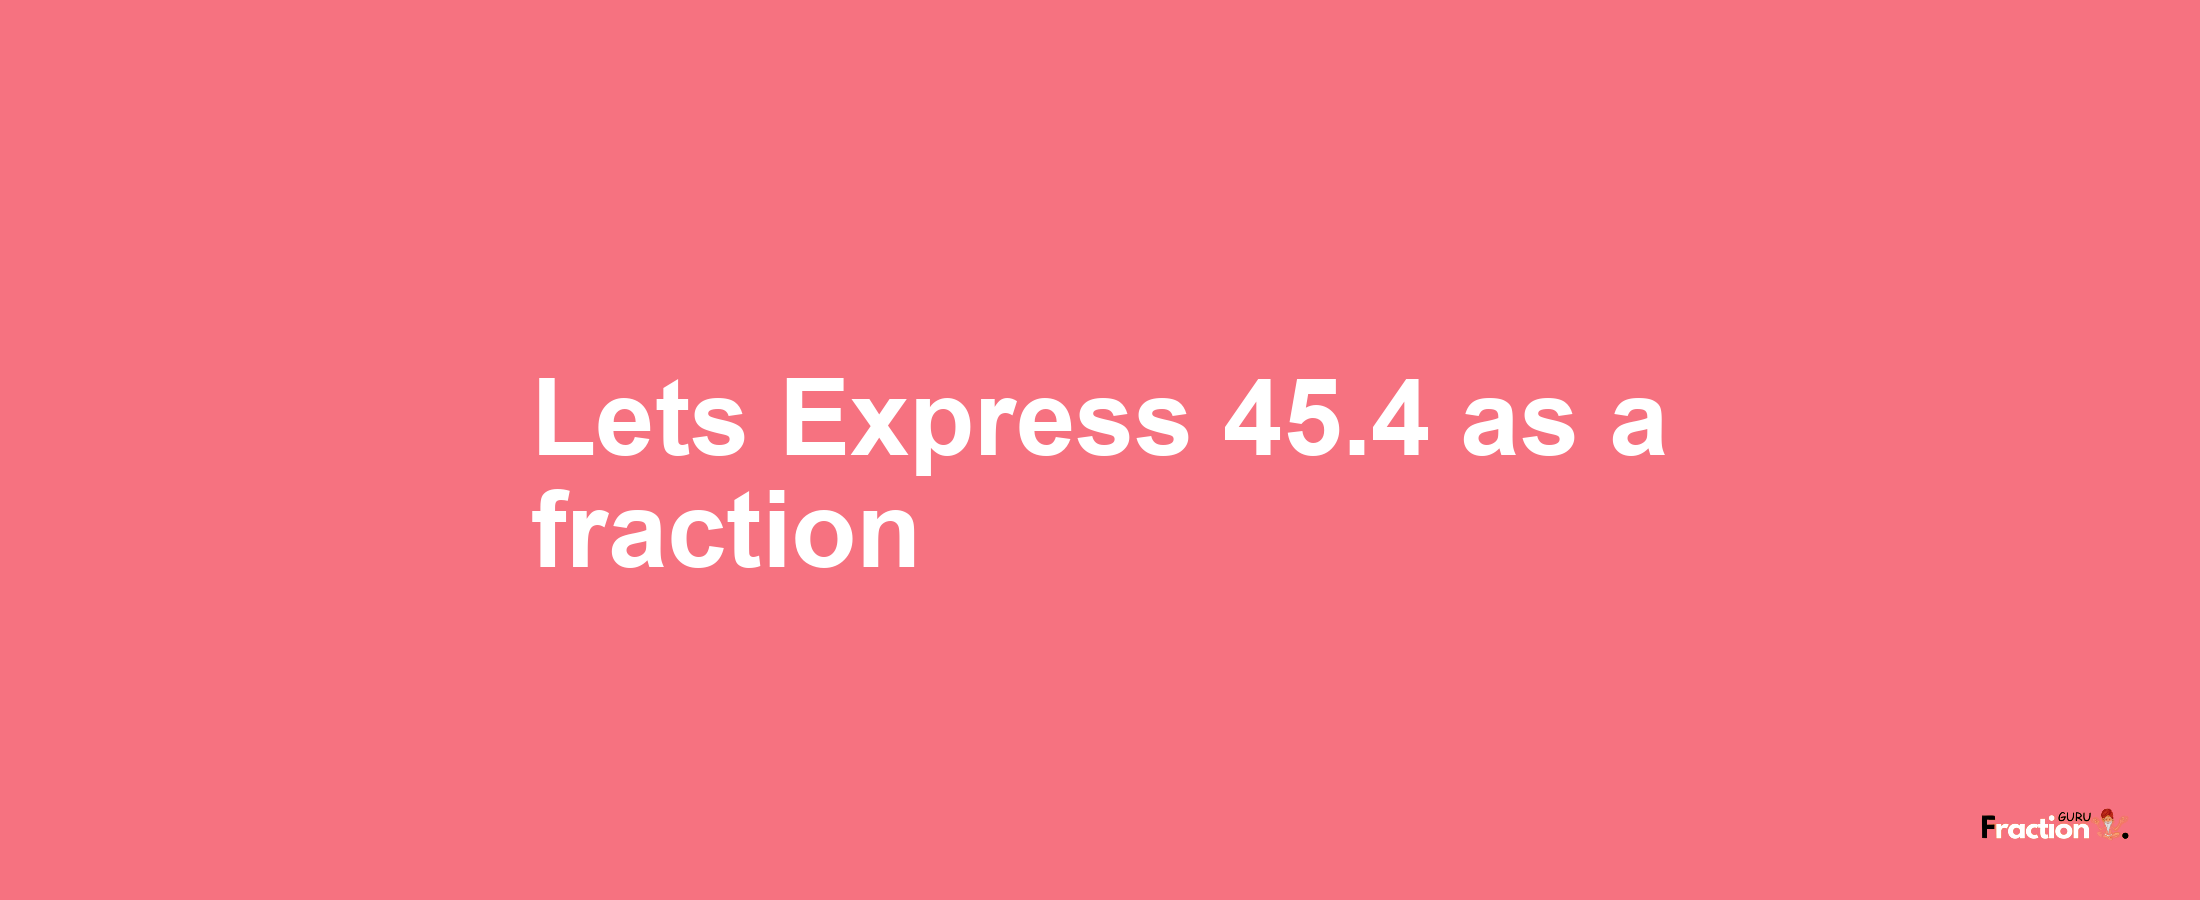 Lets Express 45.4 as afraction